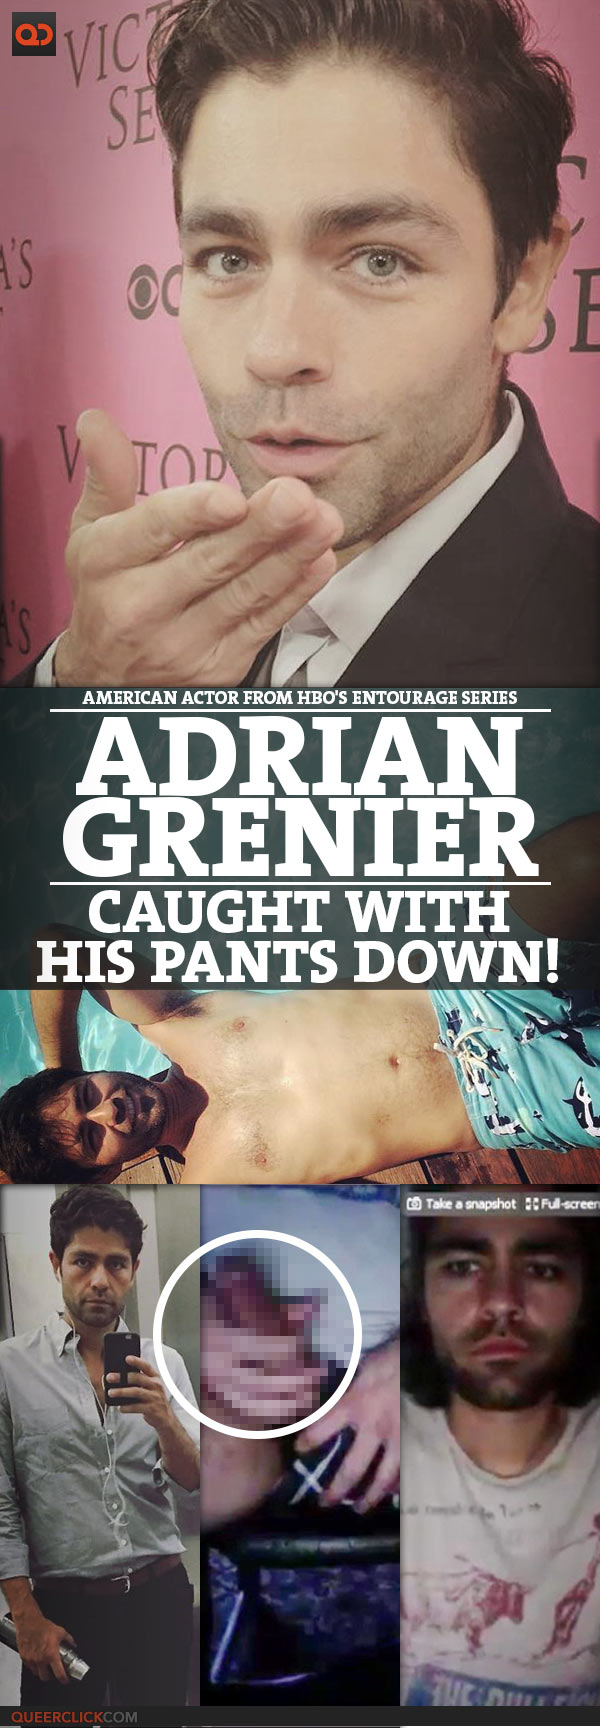 Adrian Grenier, American Actor From HBO's Entourage Series, Caught With His Pants Down!